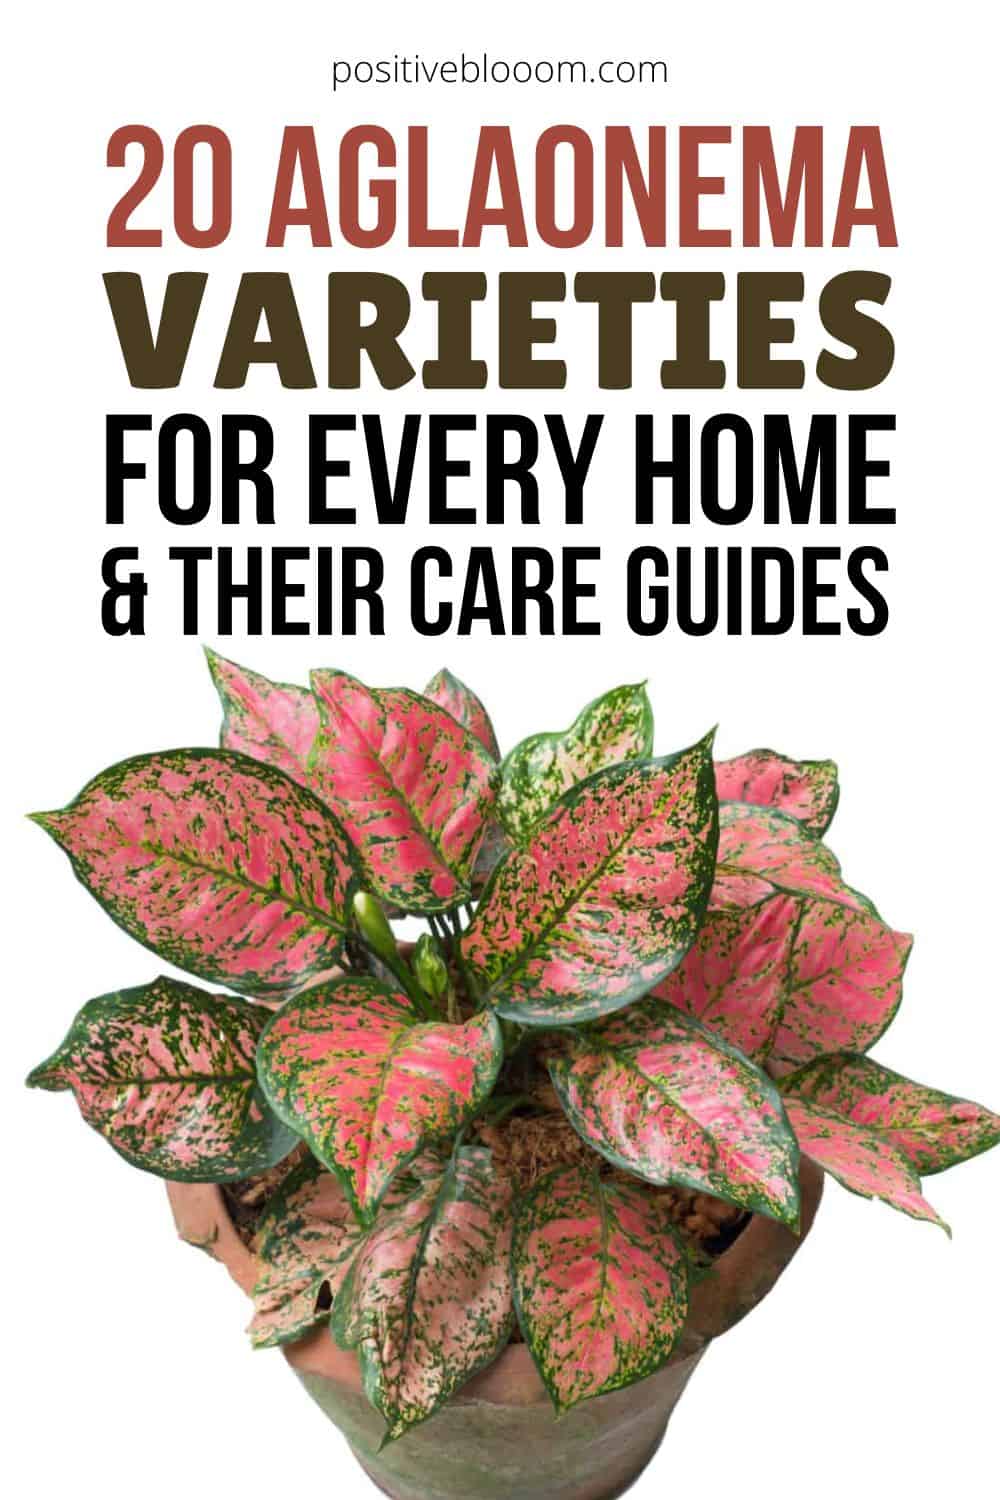 20 Aglaonema Varieties For Every Home And Their Care Guides Pinterest